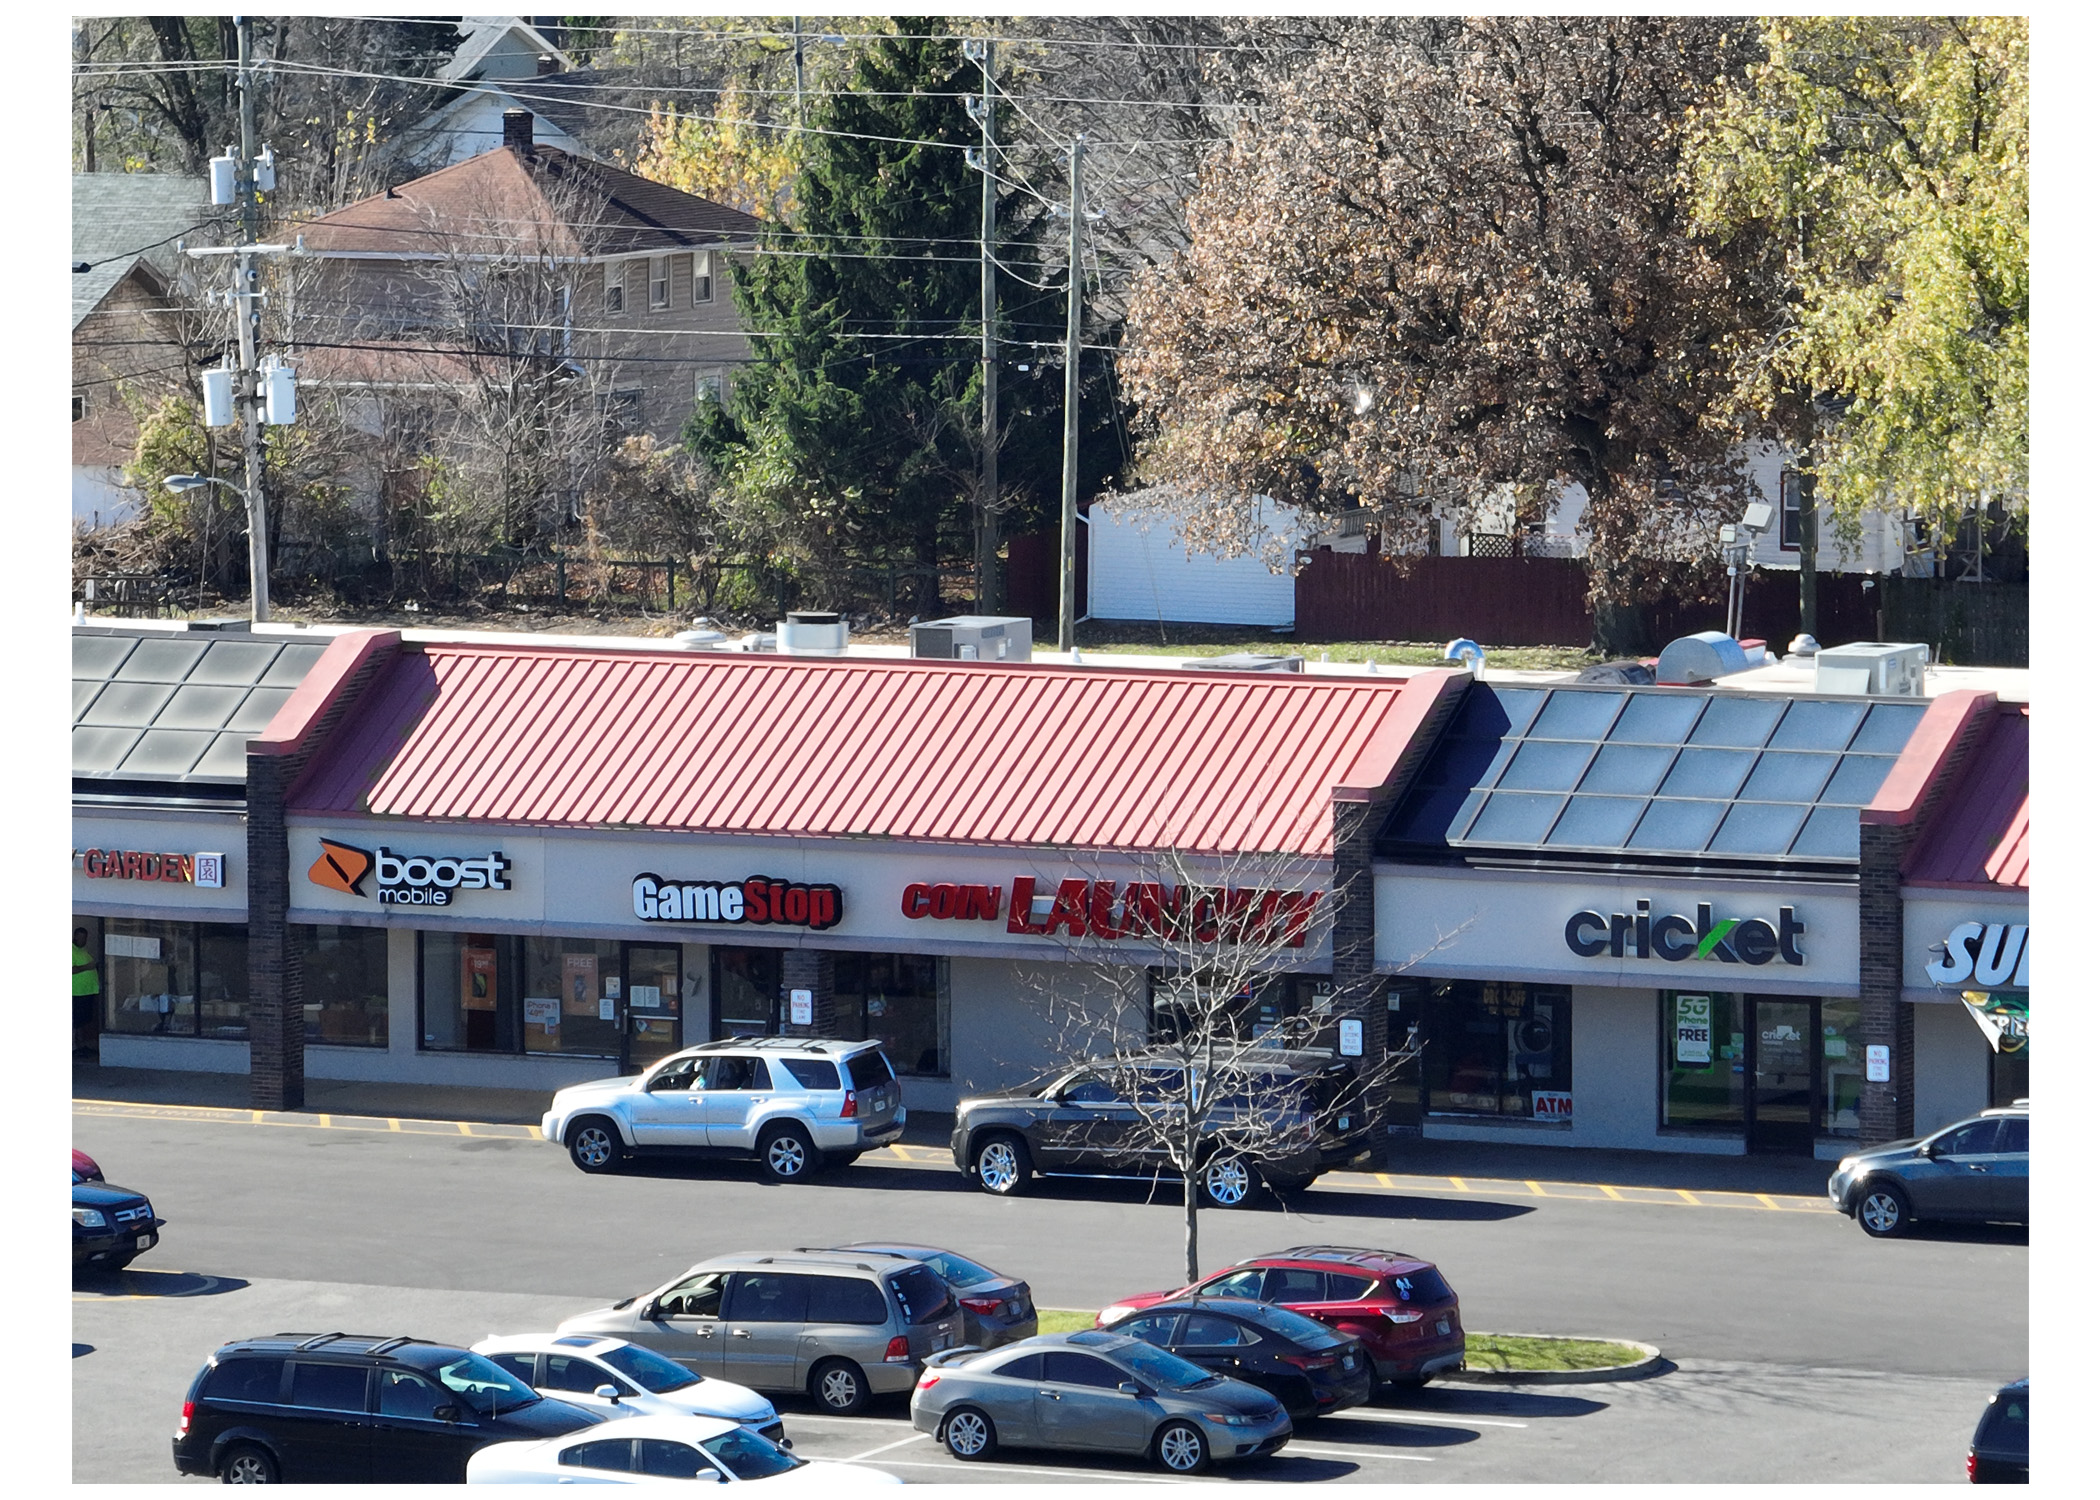 Linwood Square, Boost Mobile, Game Stop, Coin Laundry, Cricket, and parking lot, aerial view